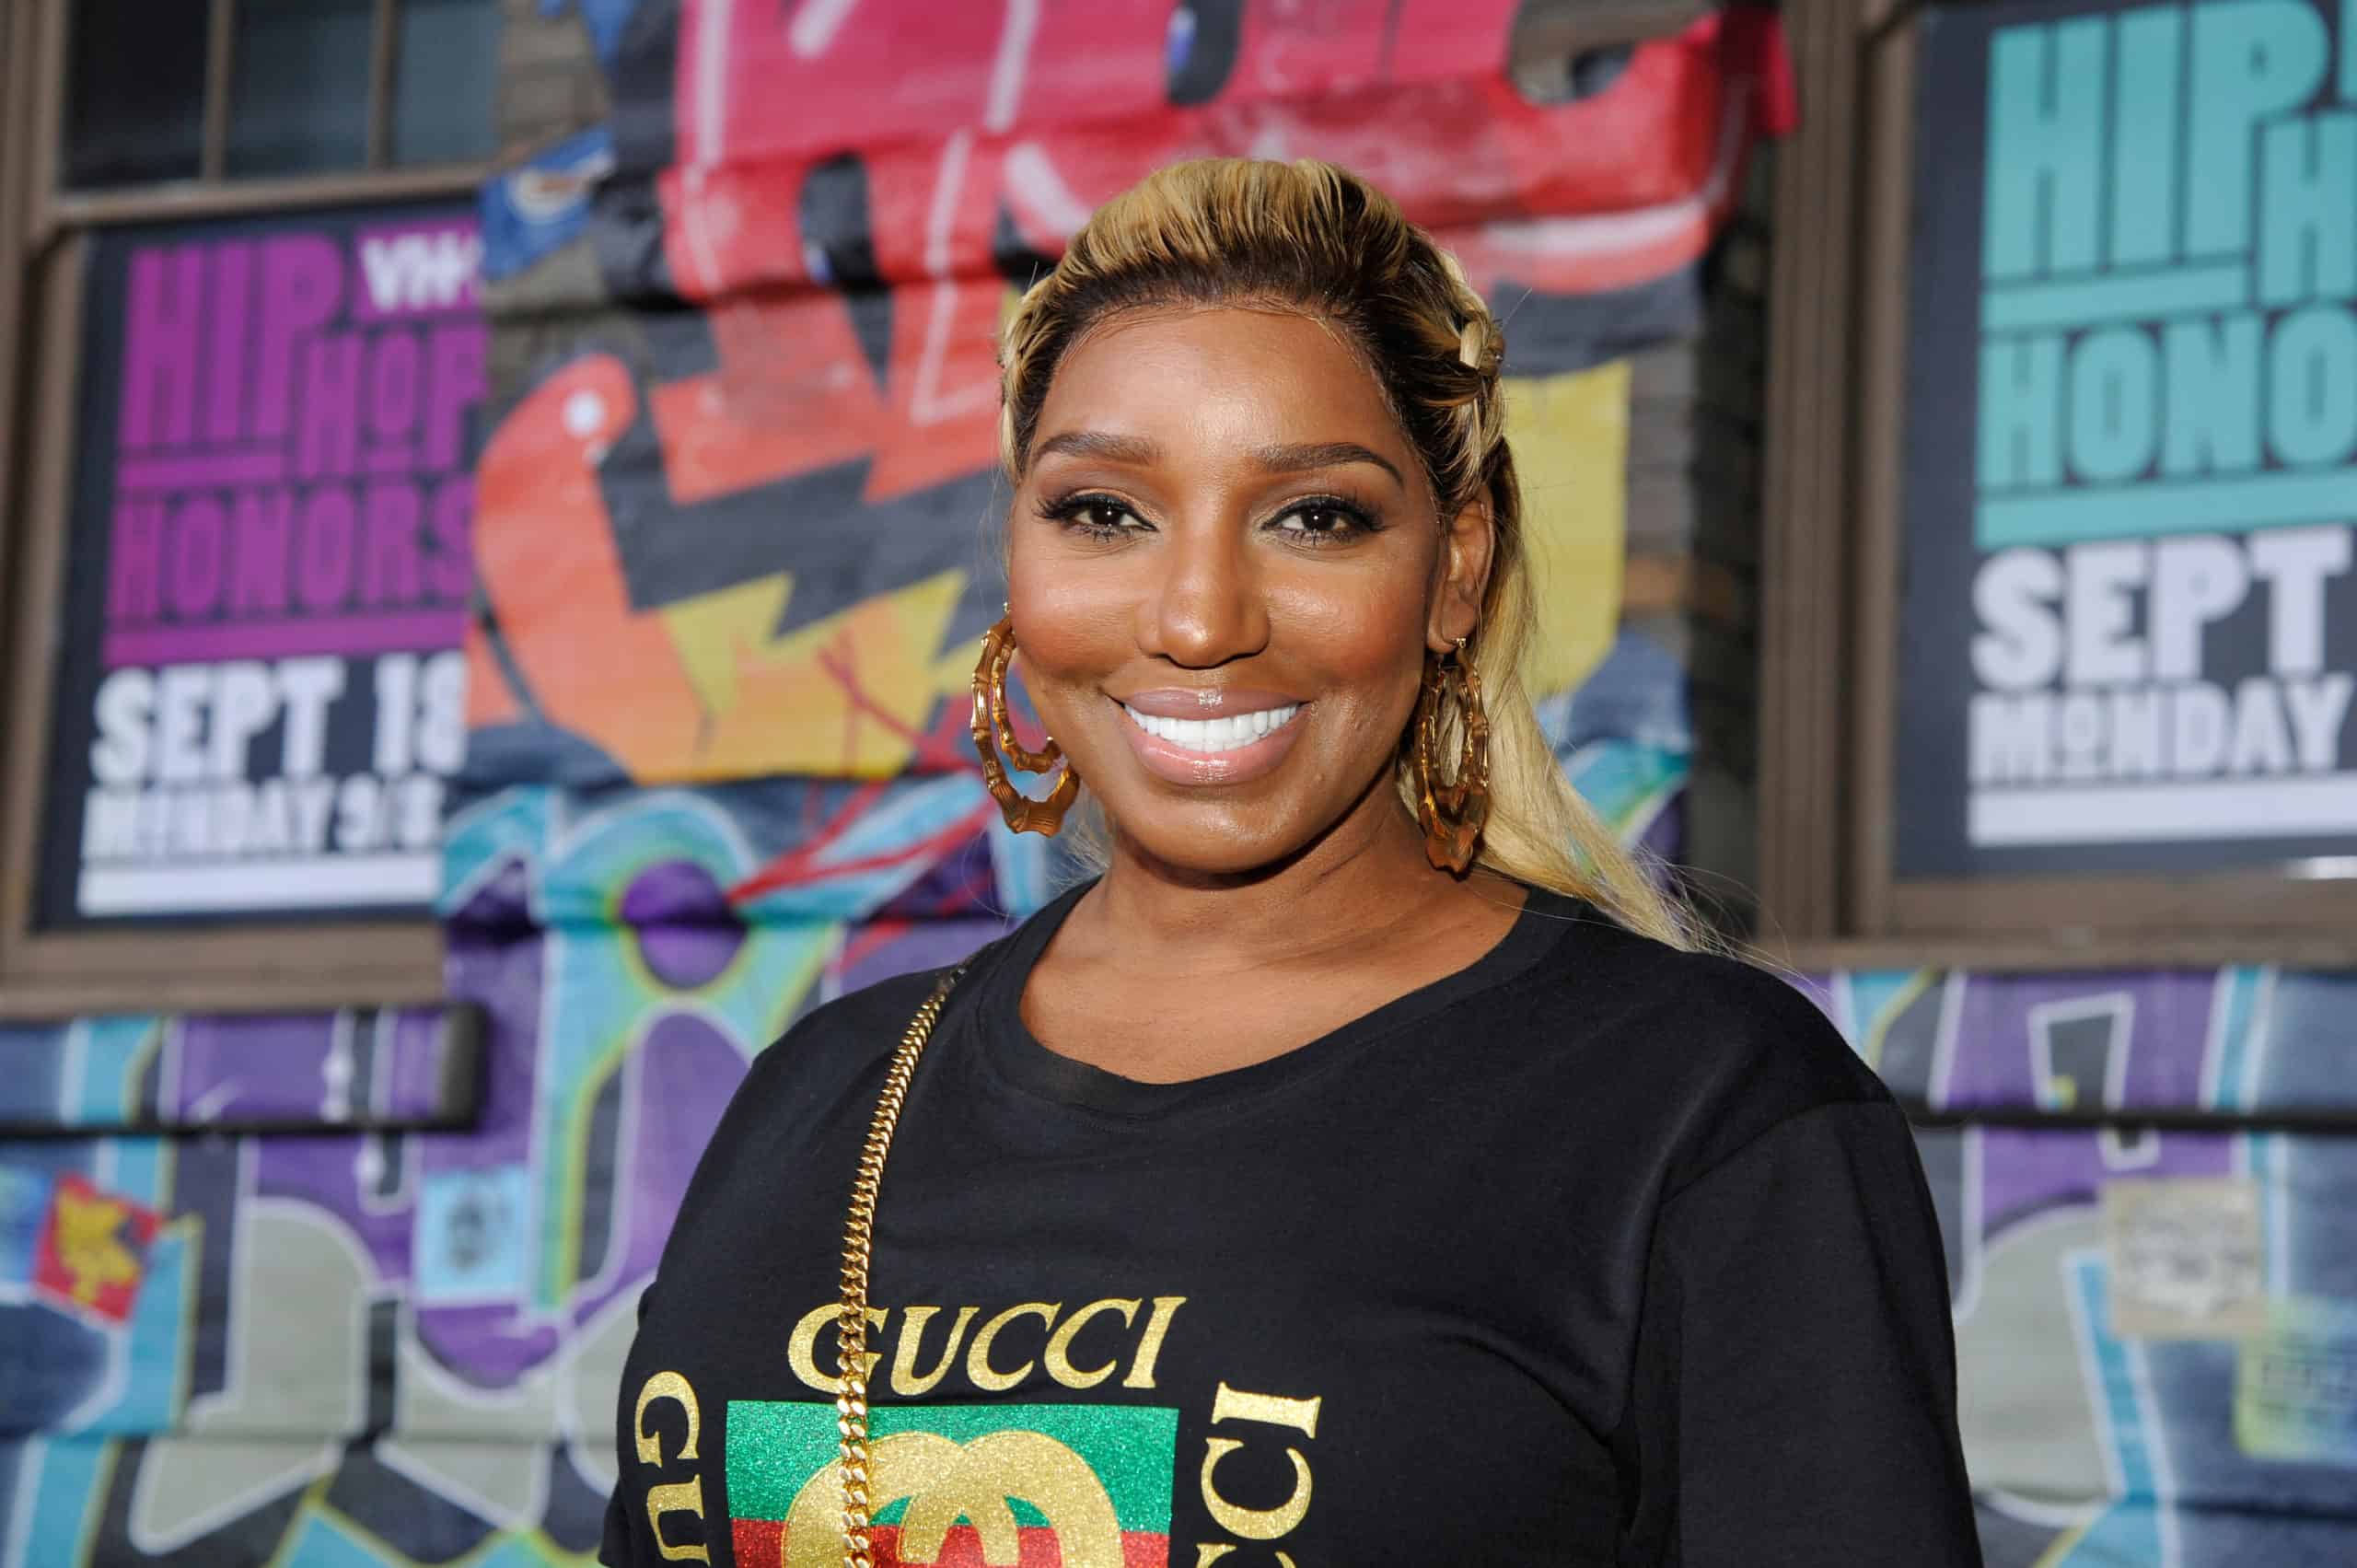 Nene Leakes shares that she would return to the "Real Housewives of Atlanta," but a talked would need to happen first.